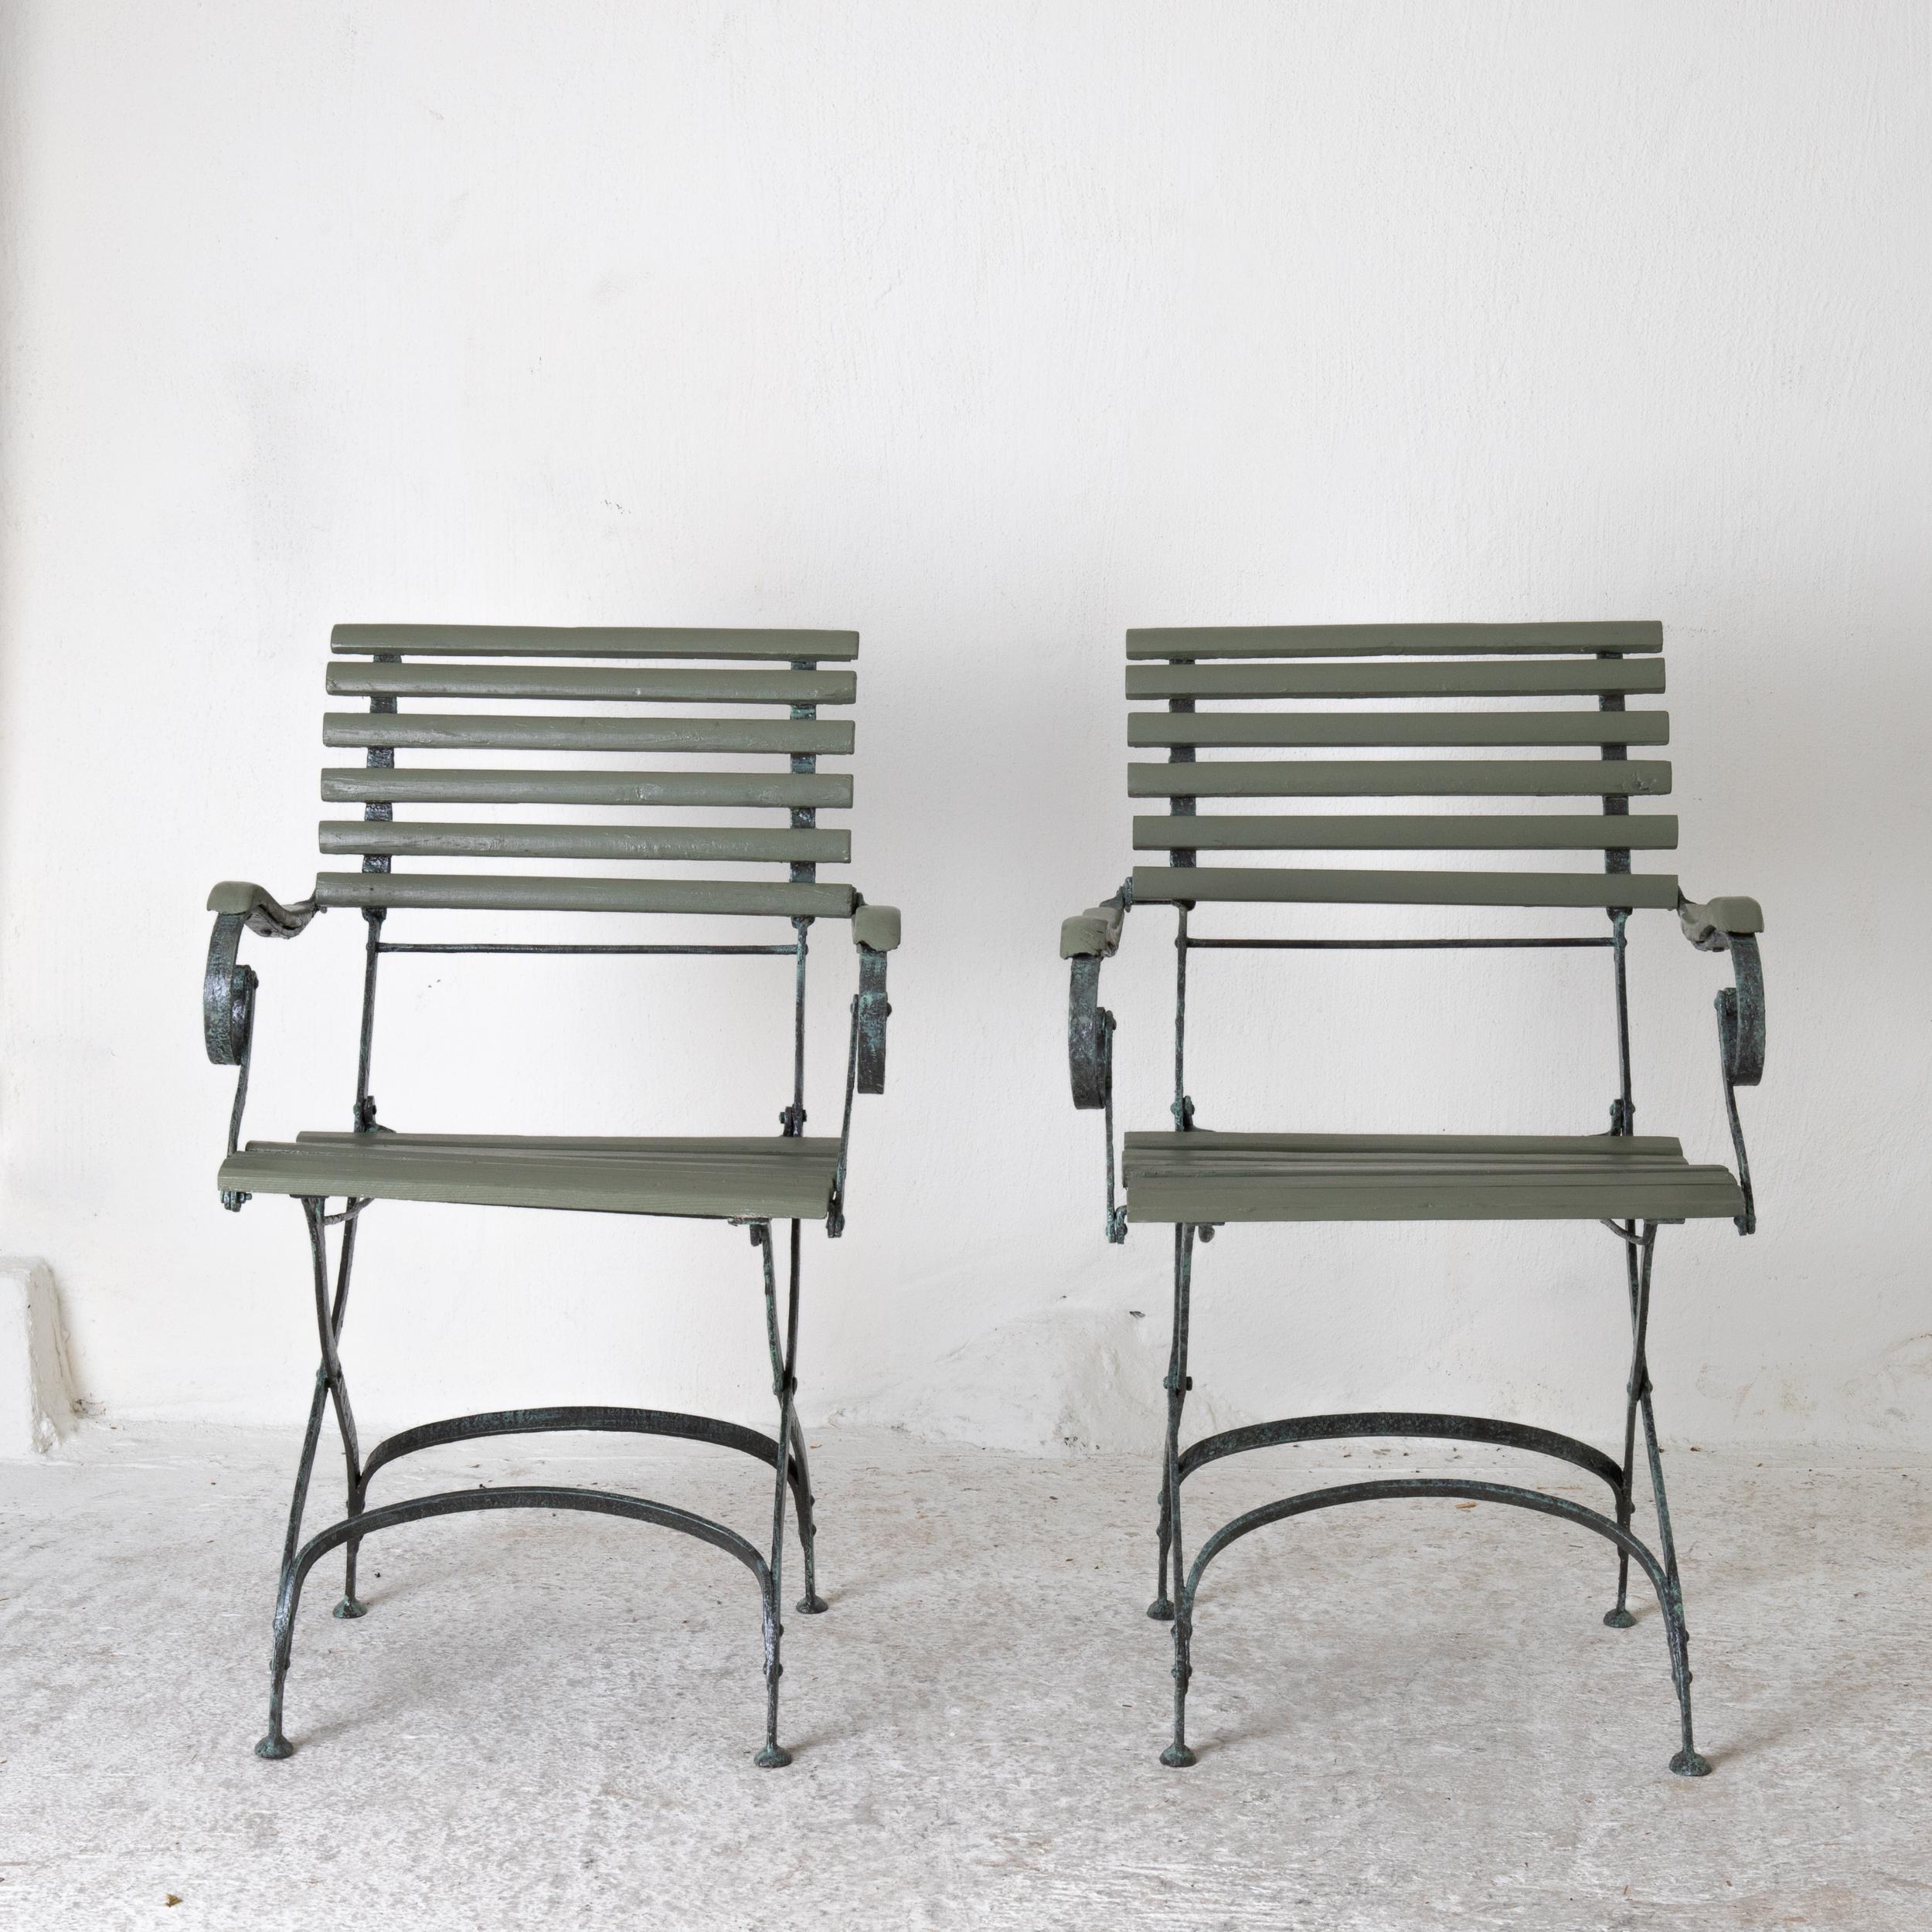 Armchairs garden Swedish green wood and iron, Sweden. A pair of garden armchairs made during the early 20th century in Sweden. Refinished in a muted green with a base made from cast iron. Wooden seat and back as well as armrests.